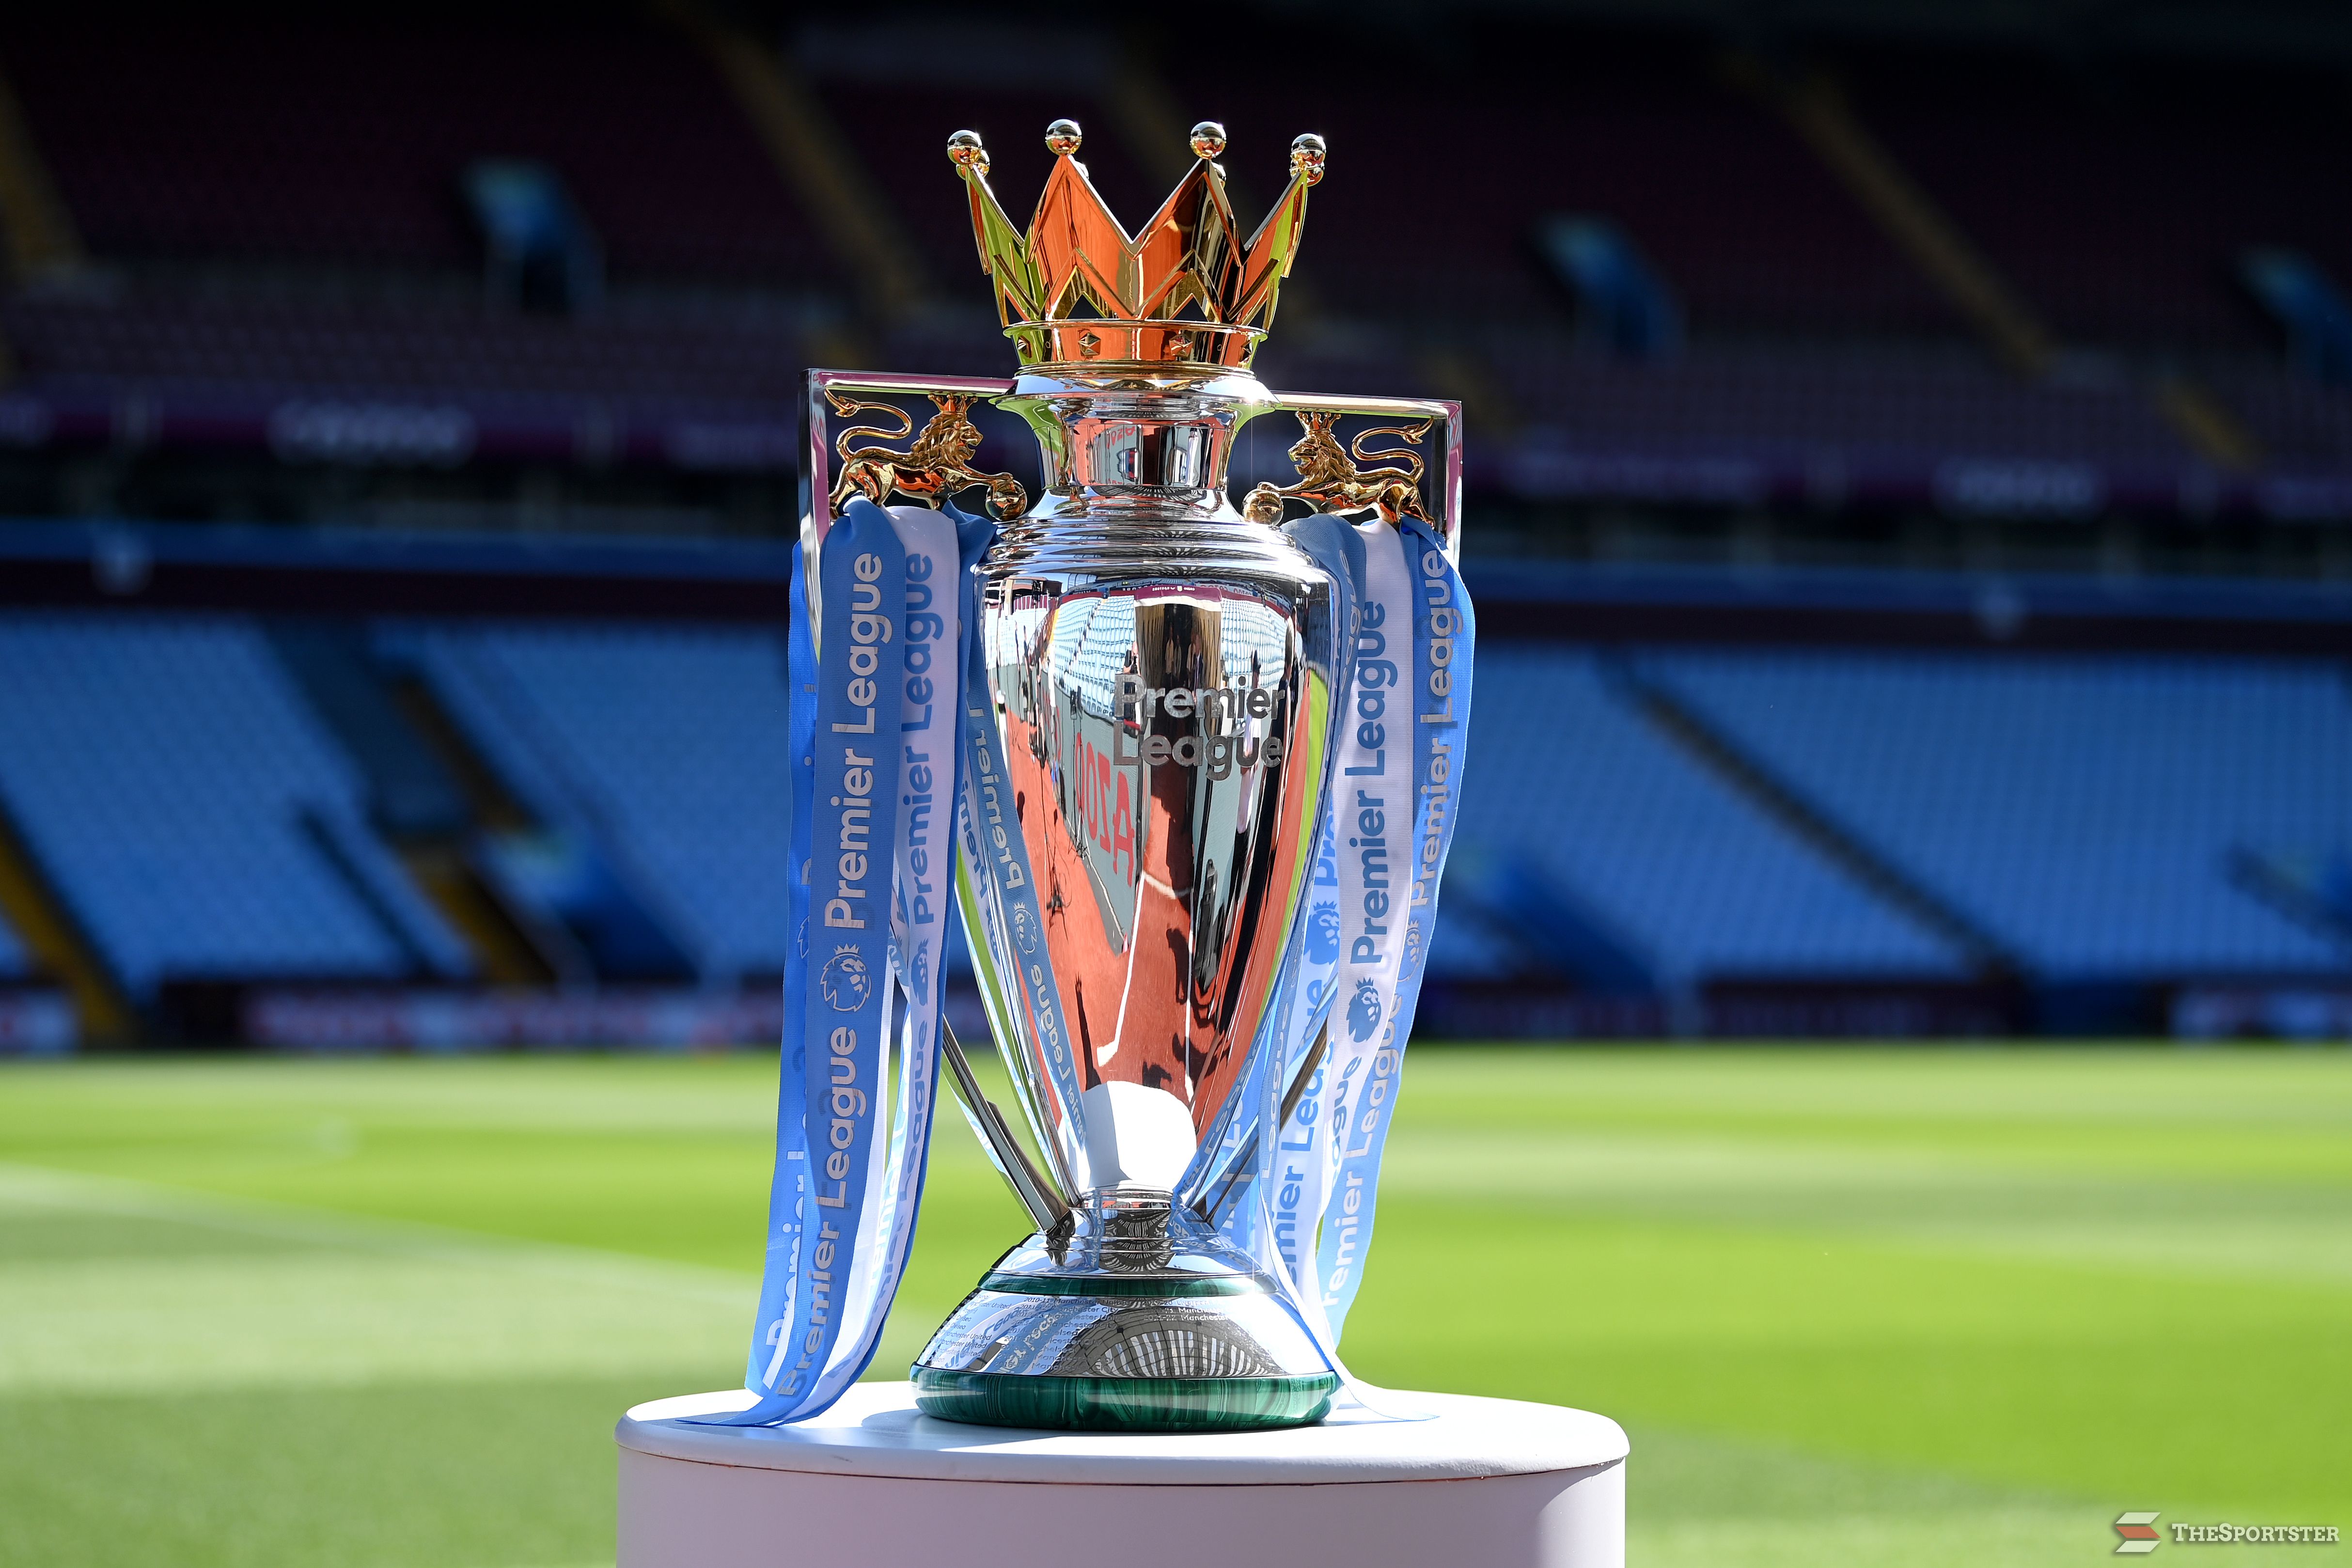 BIRMINGHAM, ENGLAND - AUGUST 13: A detailed view of the Premier League trophy is seen prior to the Premier League match between Aston Villa and Everton FC at Villa Park on August 13, 2022 in Birmingham, England. (Photo by Michael Regan/Getty Images)